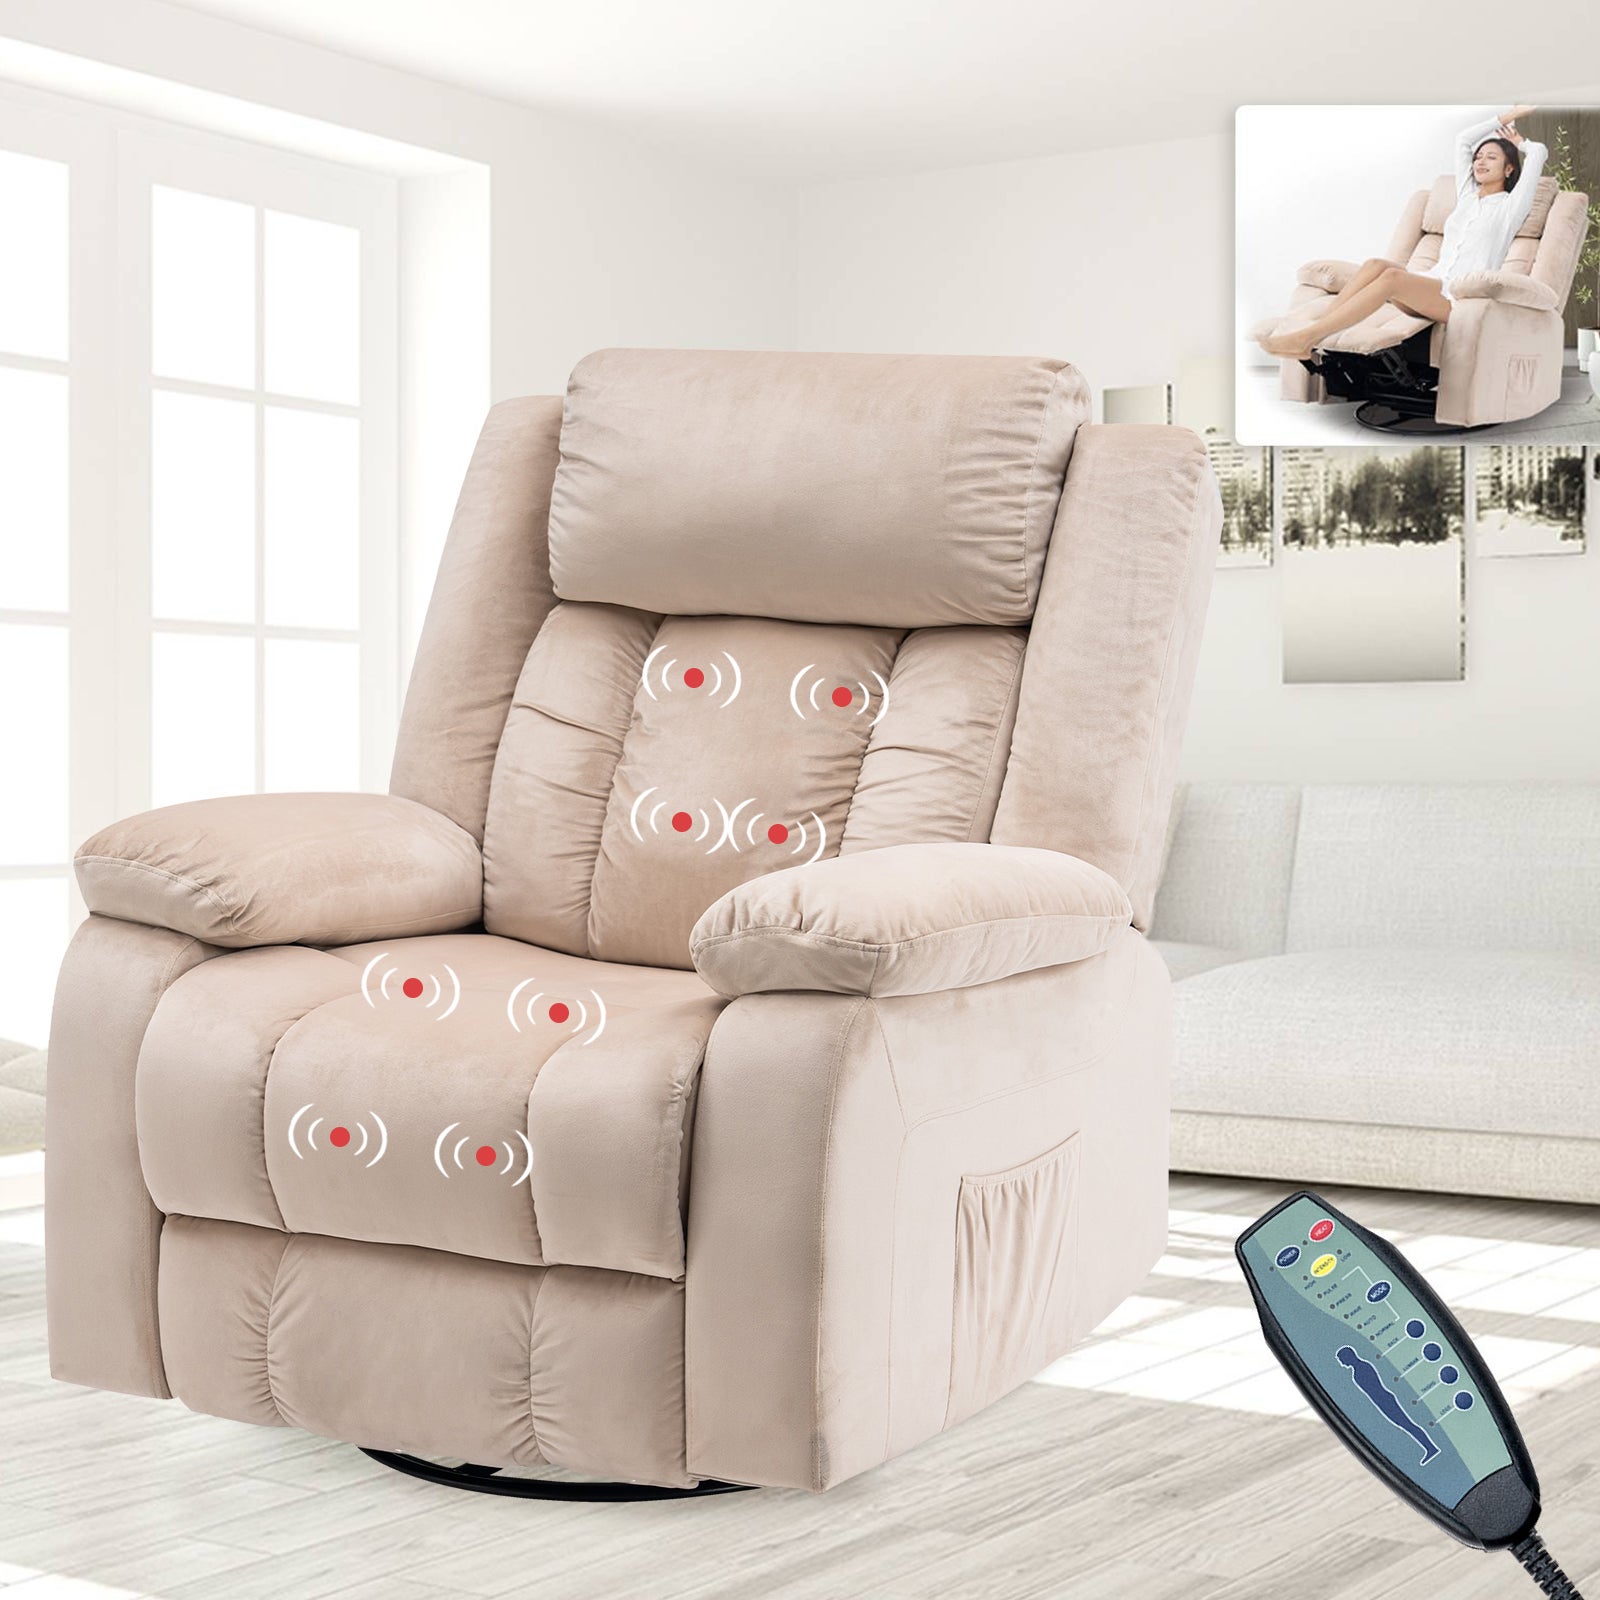 Electric Recliner Chair, Massage Recliner with Heat and Vibration Manual Reclining Chair(360 degree Rotate Base,Beige)